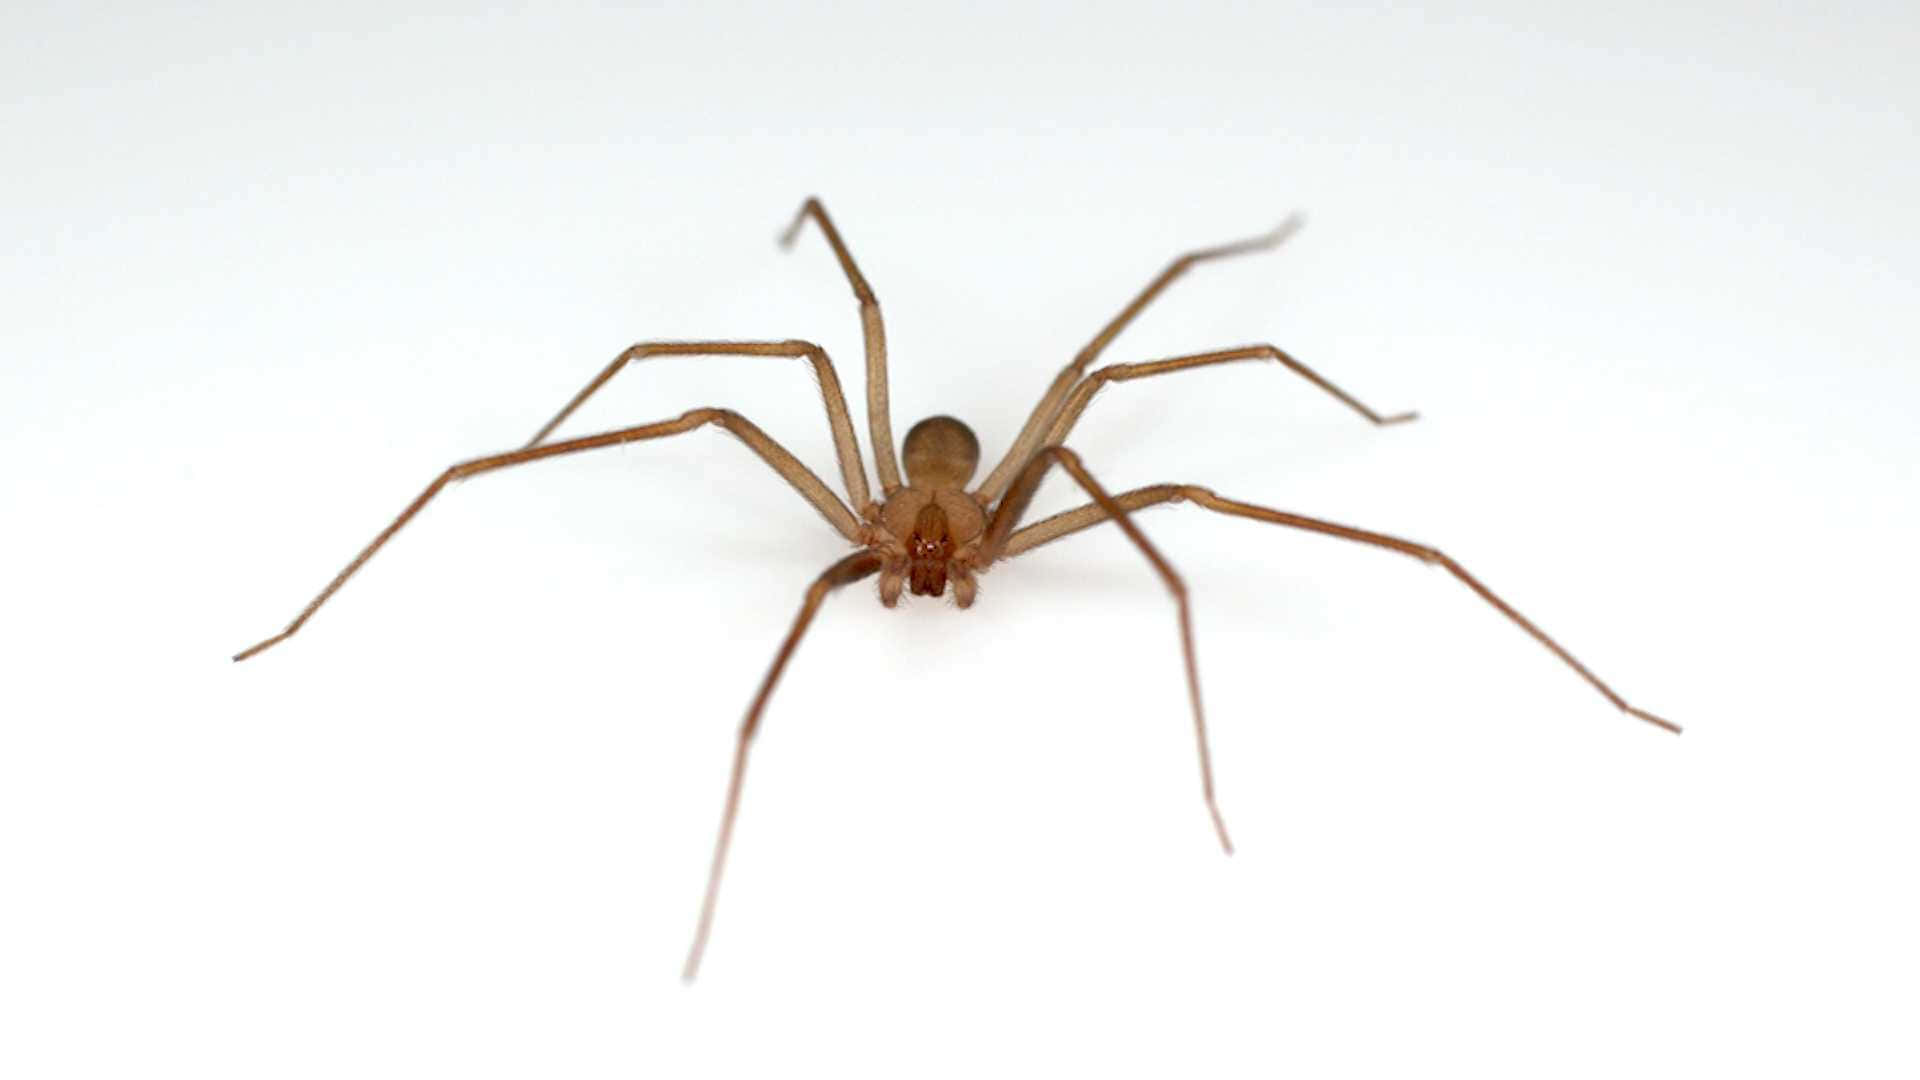 Up-close View of a Brown Recluse Spider Wallpaper